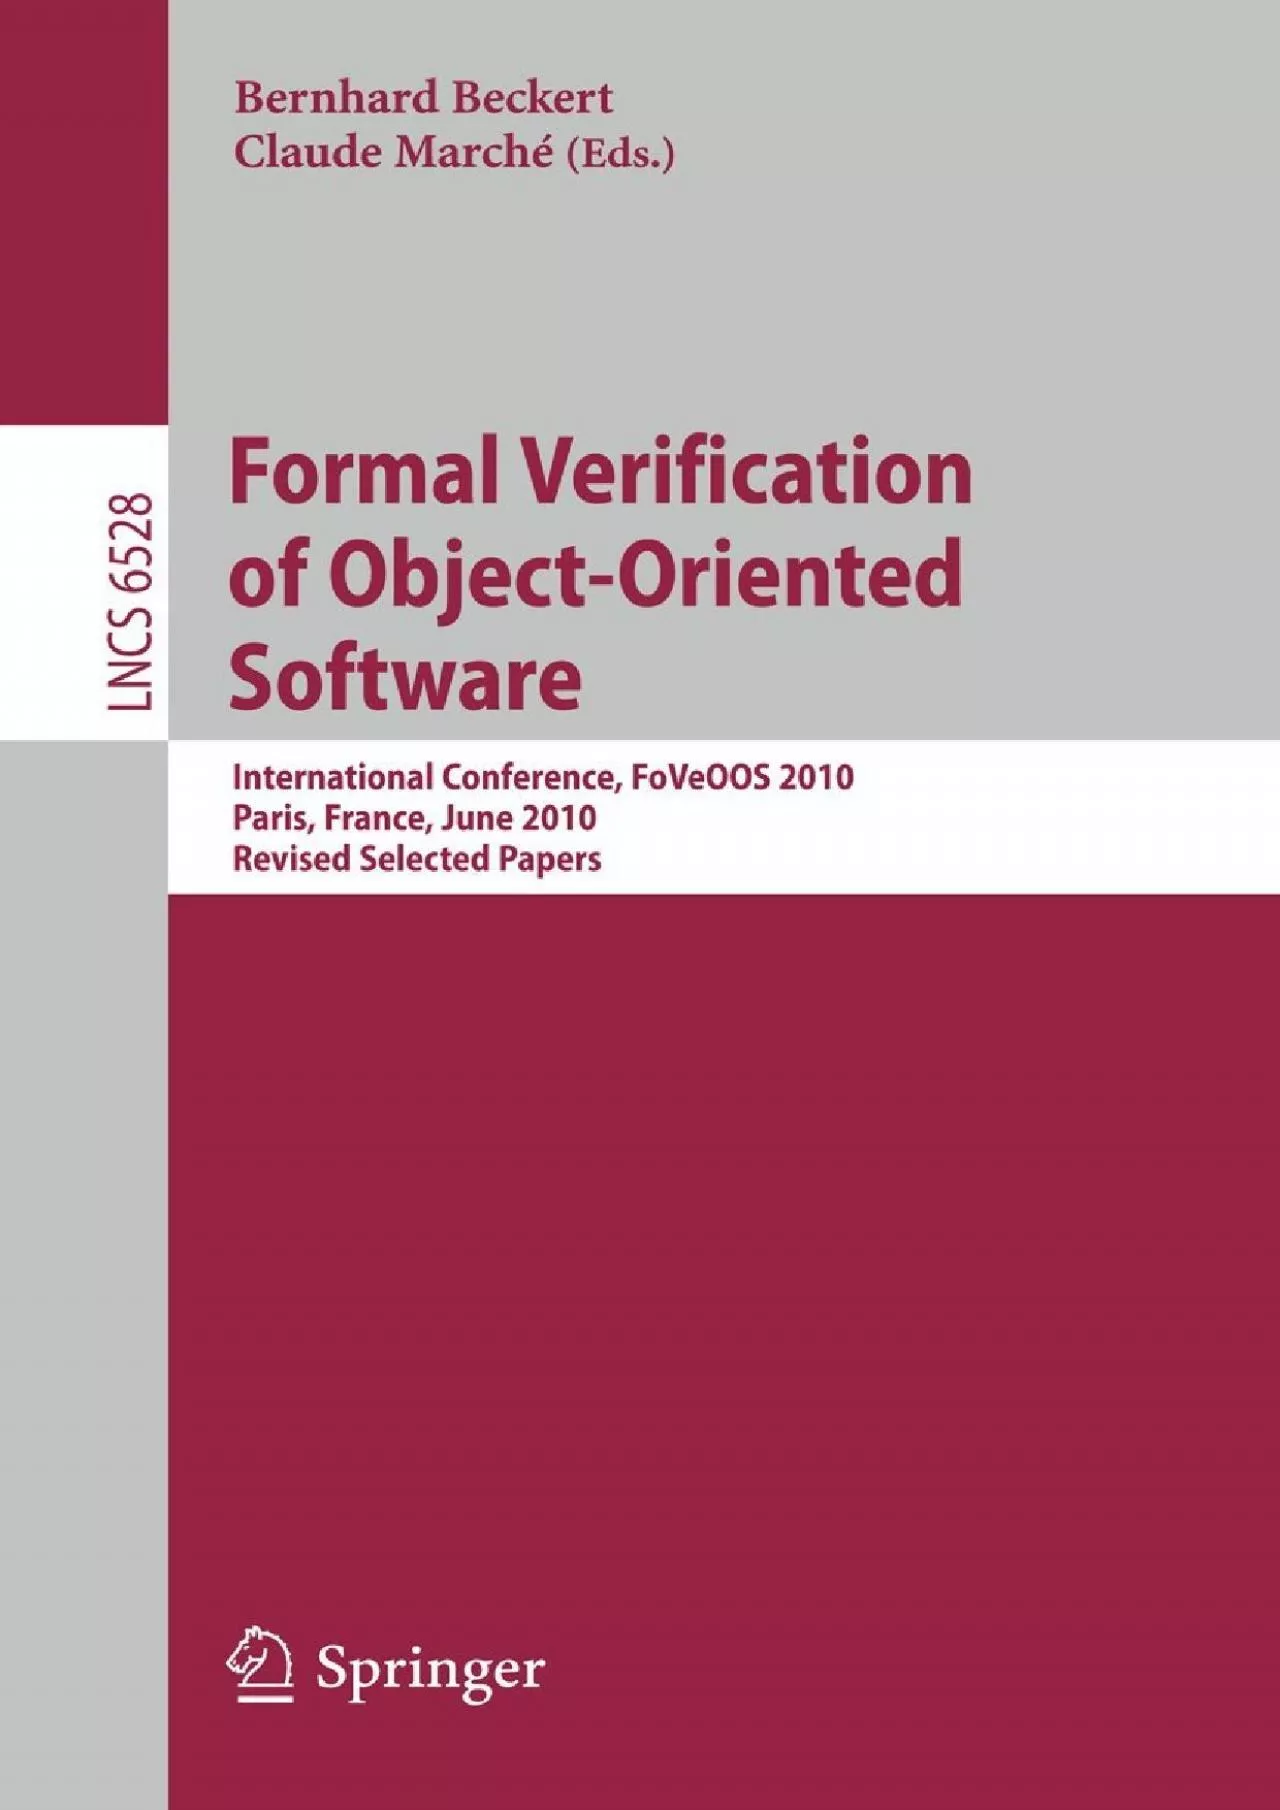 [FREE]-Formal Verification of Object-Oriented Software: International Conference, FoVeOOS